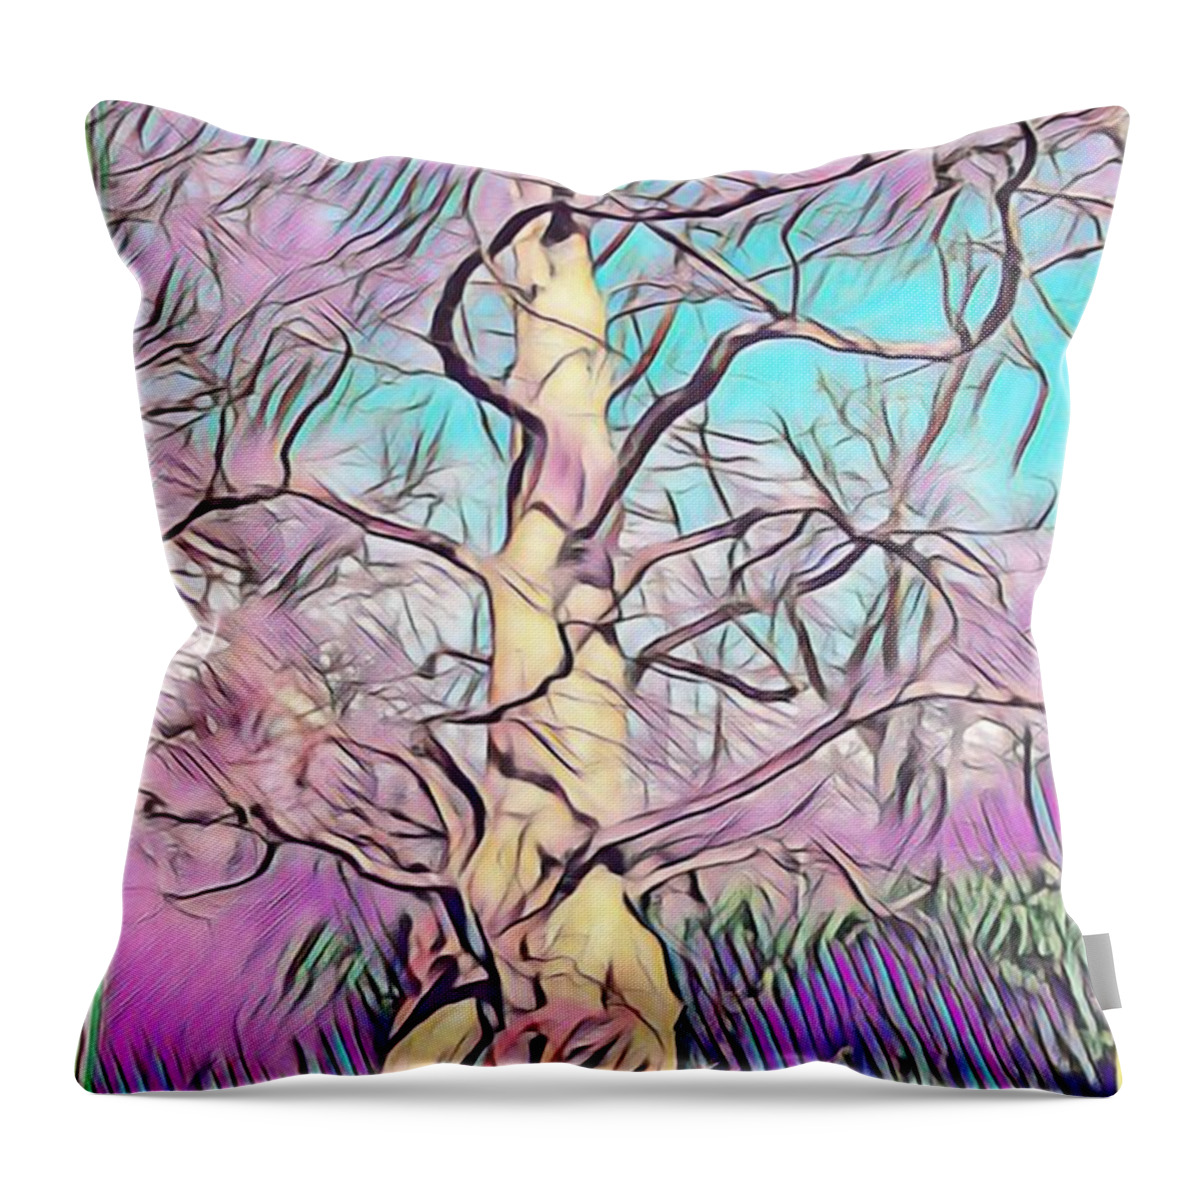 Pink Drawing Effect Throw Pillow featuring the mixed media Bubblegum Palette by Kimberly Furey